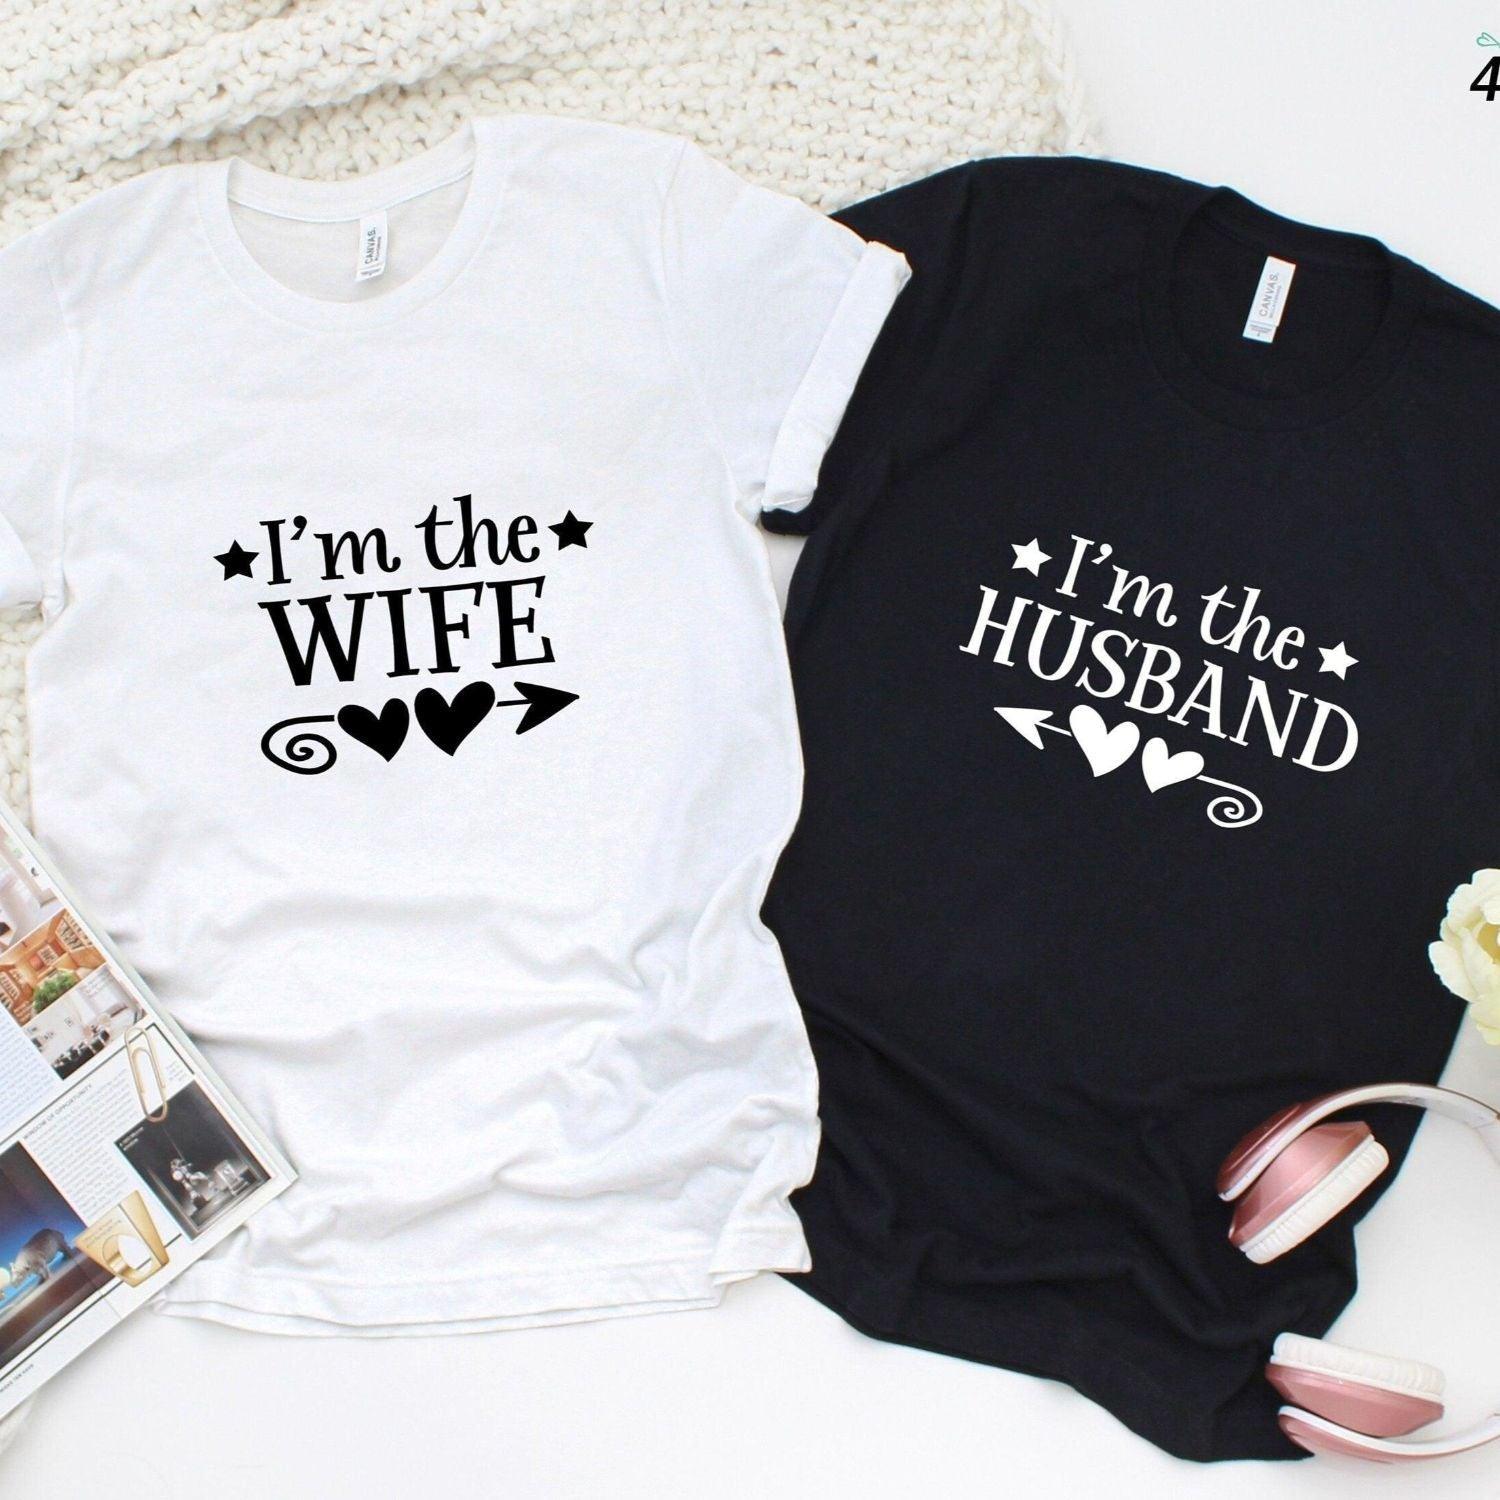 Couples' Matching Outfits - Adorable Wife/Husband Set, Ideal Valentine's Day Surprise - 4Lovebirds